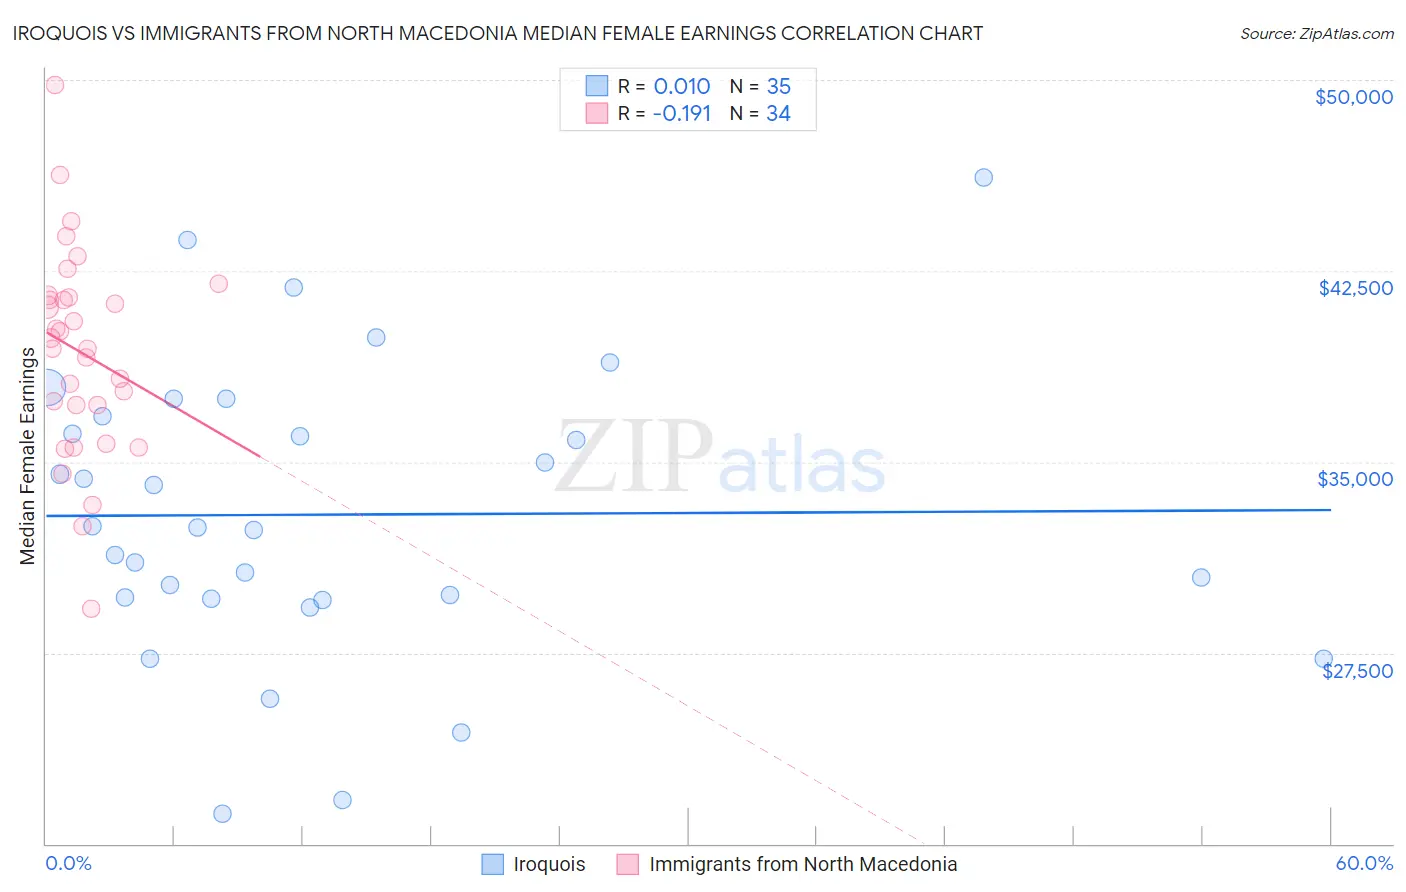 Iroquois vs Immigrants from North Macedonia Median Female Earnings